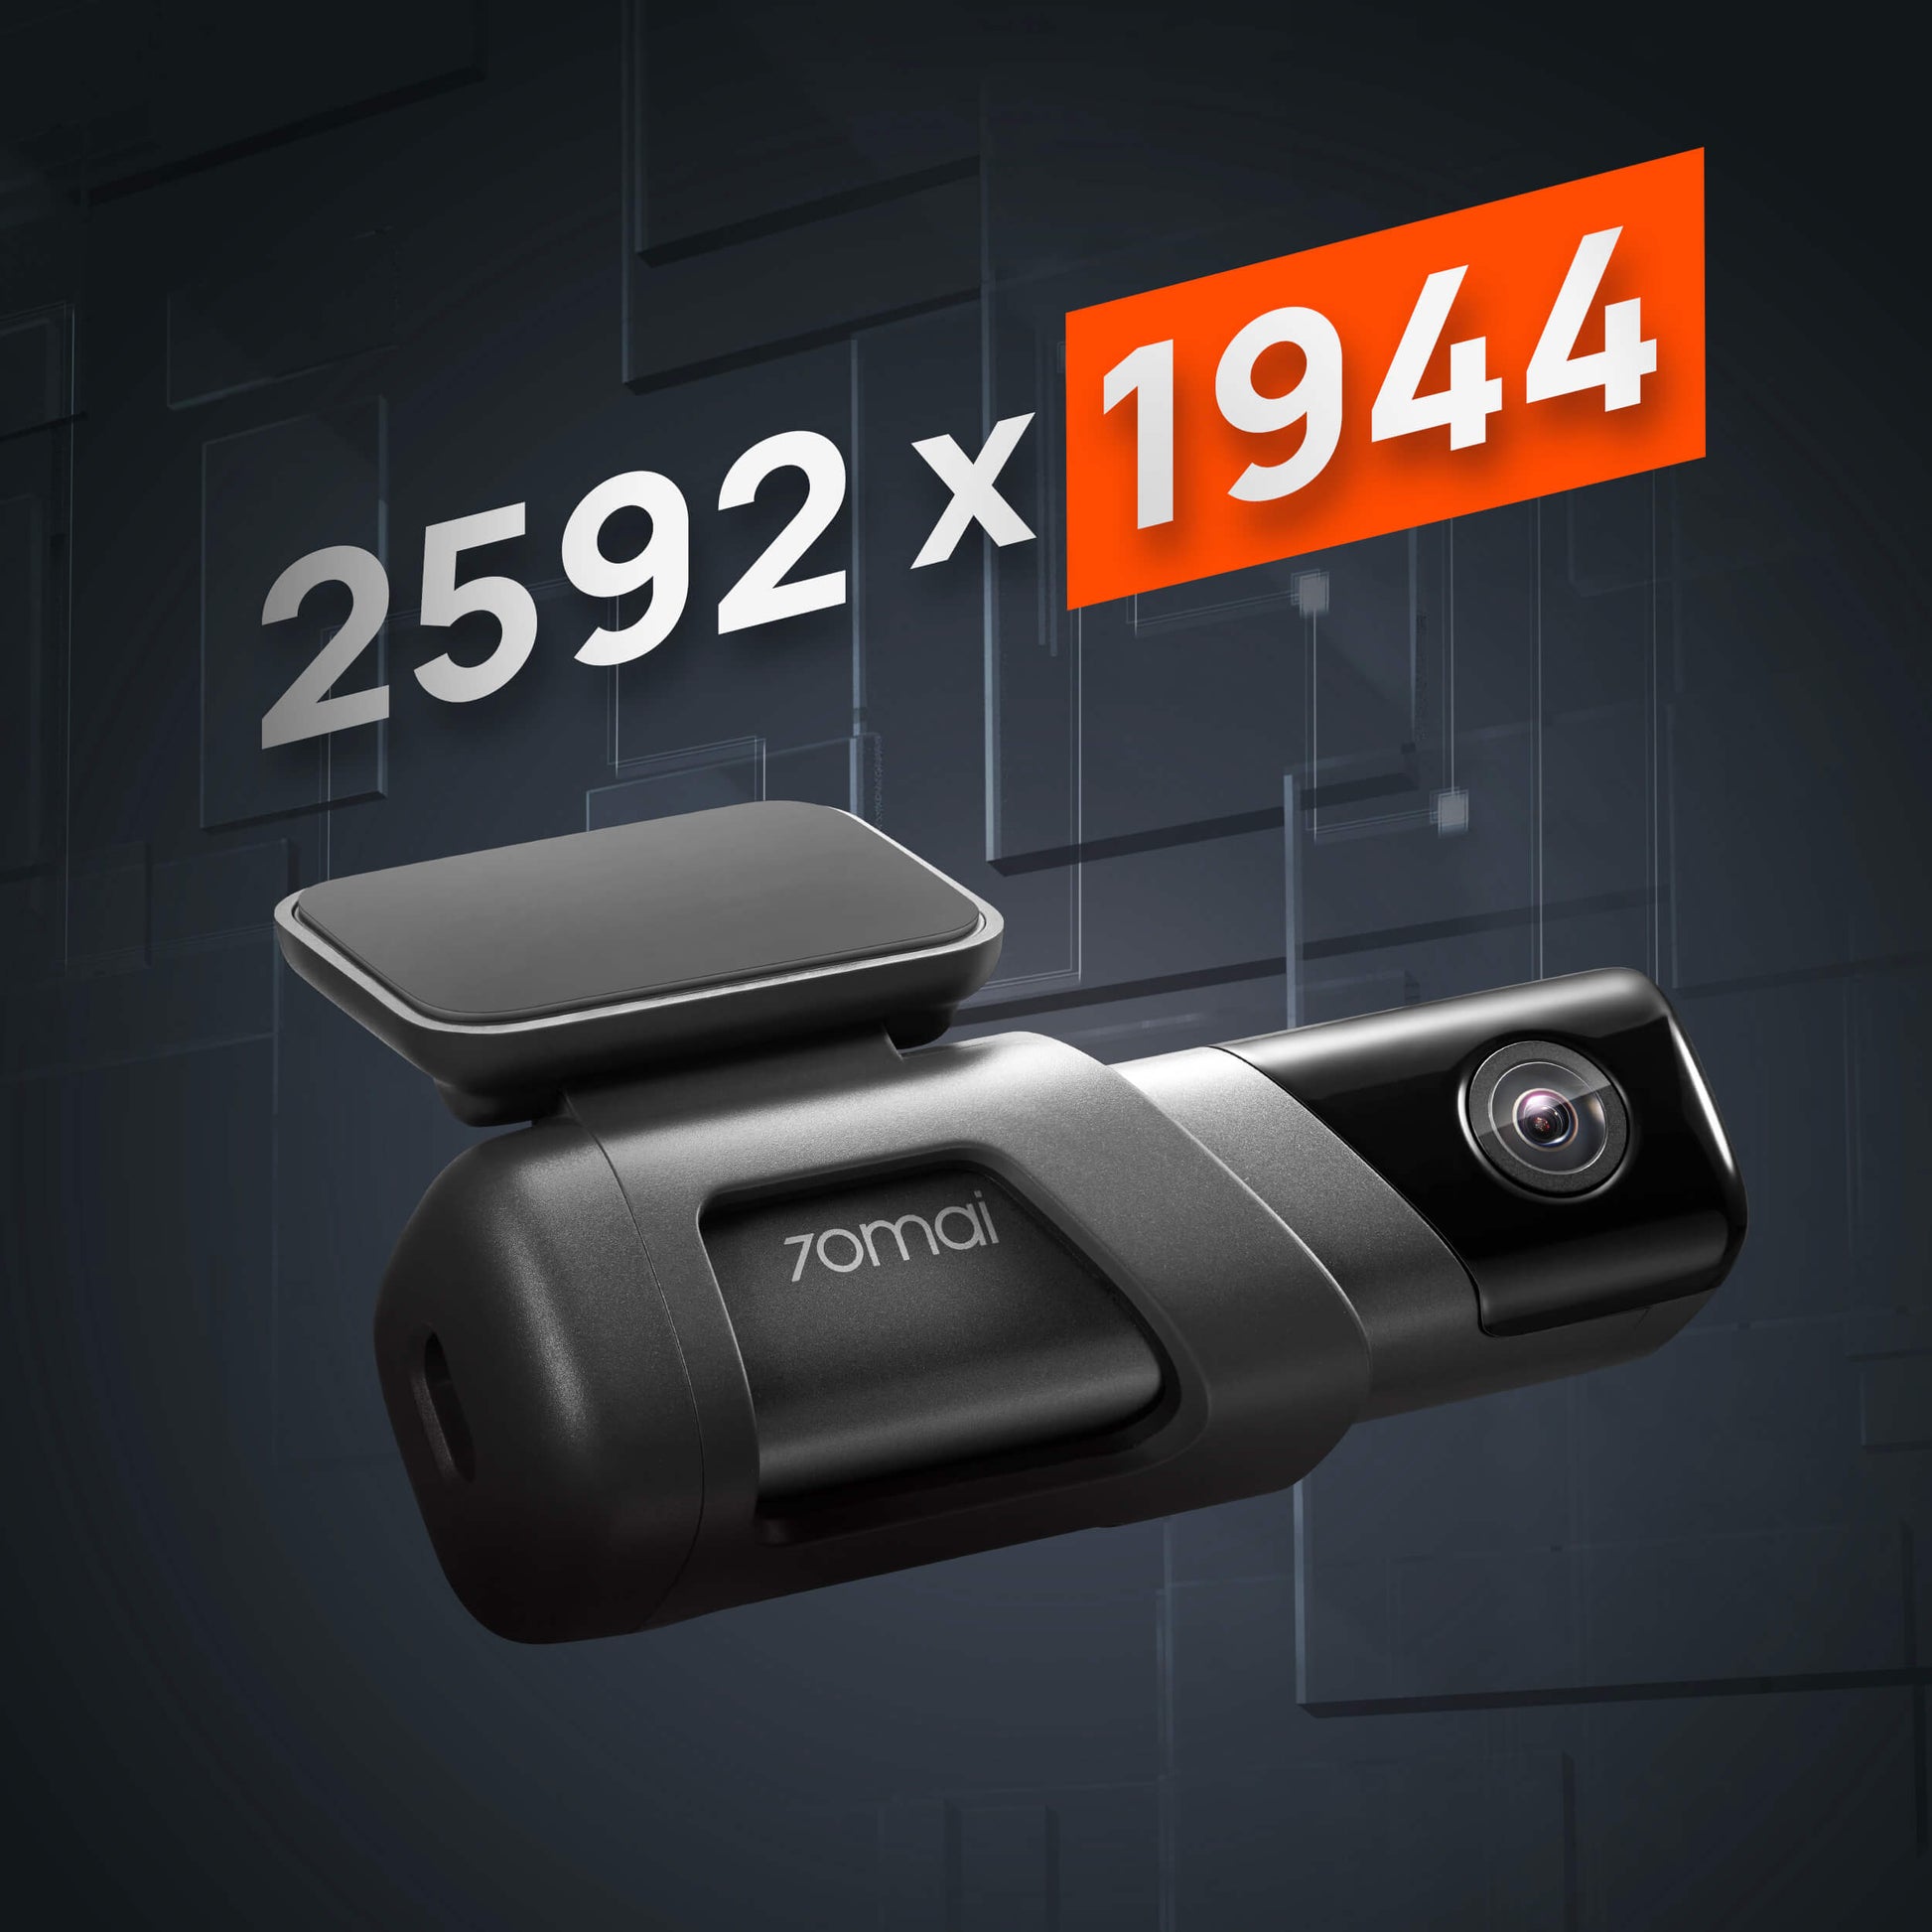 70mai Dash Cam M500 2.7K HDR Night Vision 170° FOV Driving Assistant – 70mai  Official Store